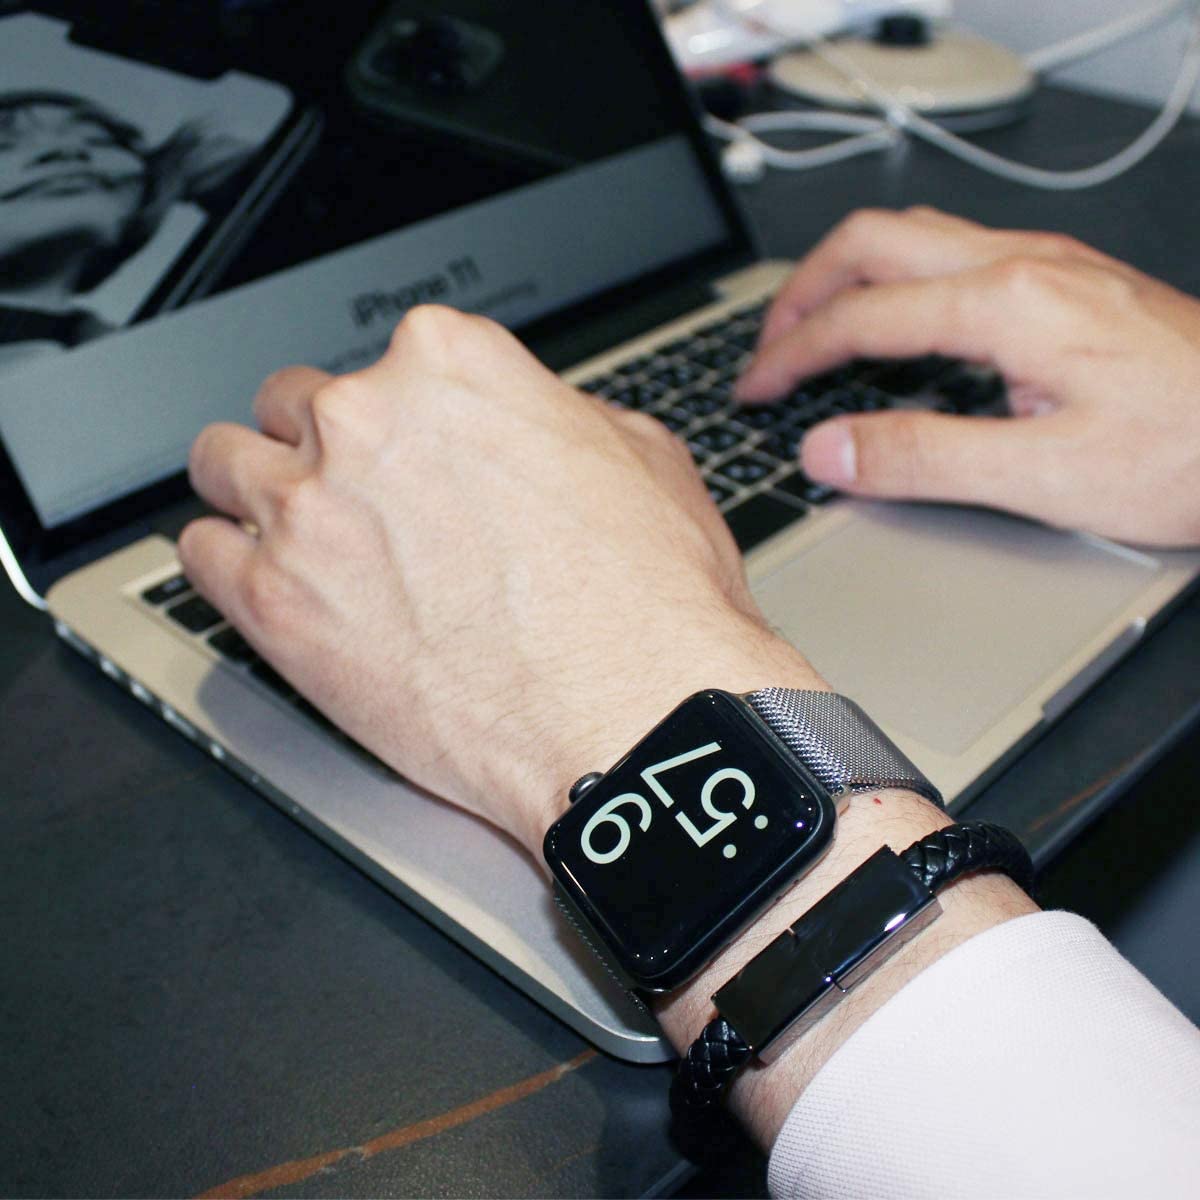 A person has their hands and wrists resting on a laptop keyboard. The person is wearing a USB charging bracelet along with a black watch.